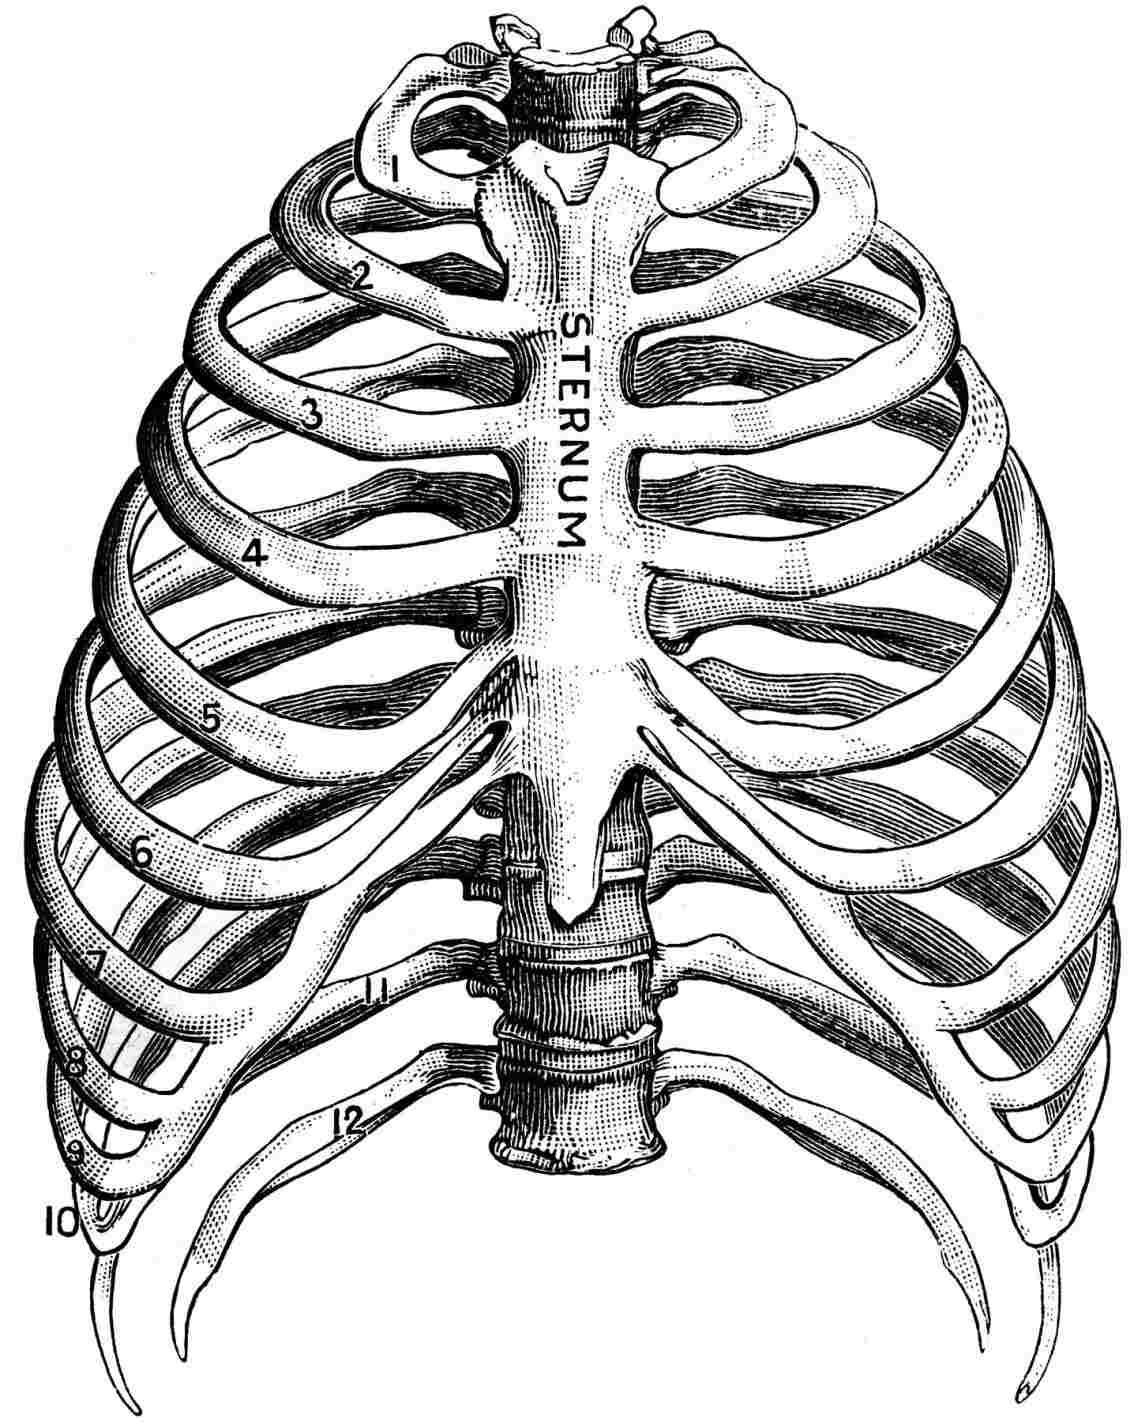 Rib Cage Anatomy Thoracic Spine Anatomy The Rib Cage Shaped In A